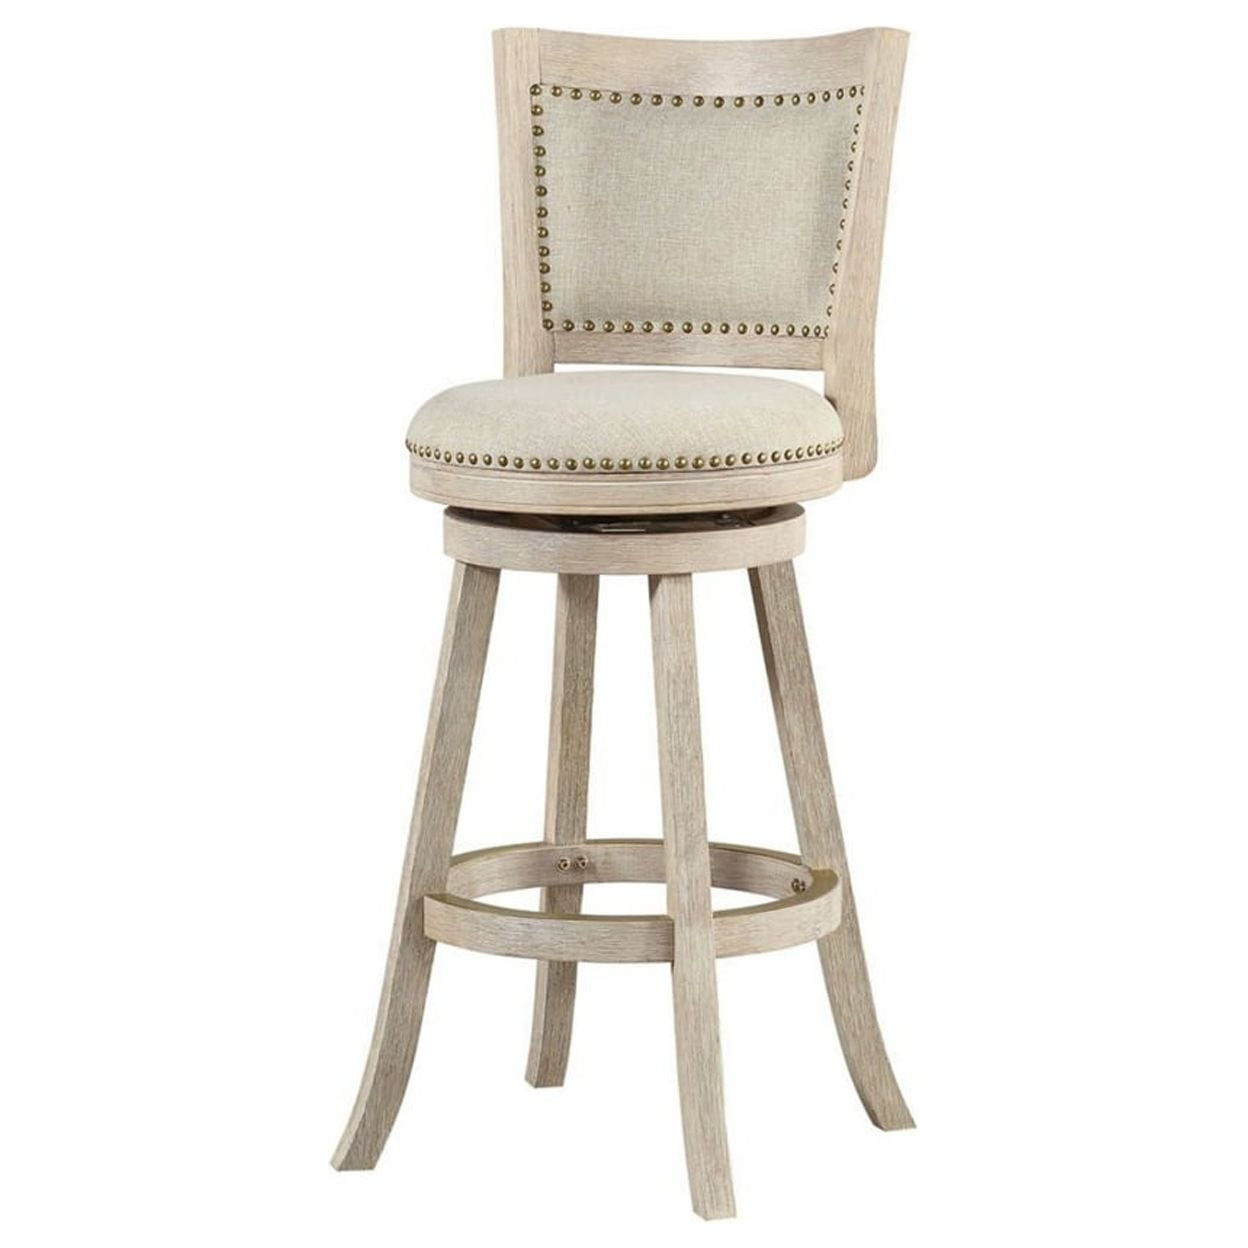 Picture of Benjara BM239739 43.5 x 18 x 21.5 in. Curved Back Wooden Swivel Bar Stool with Nailhead Trim, Gray